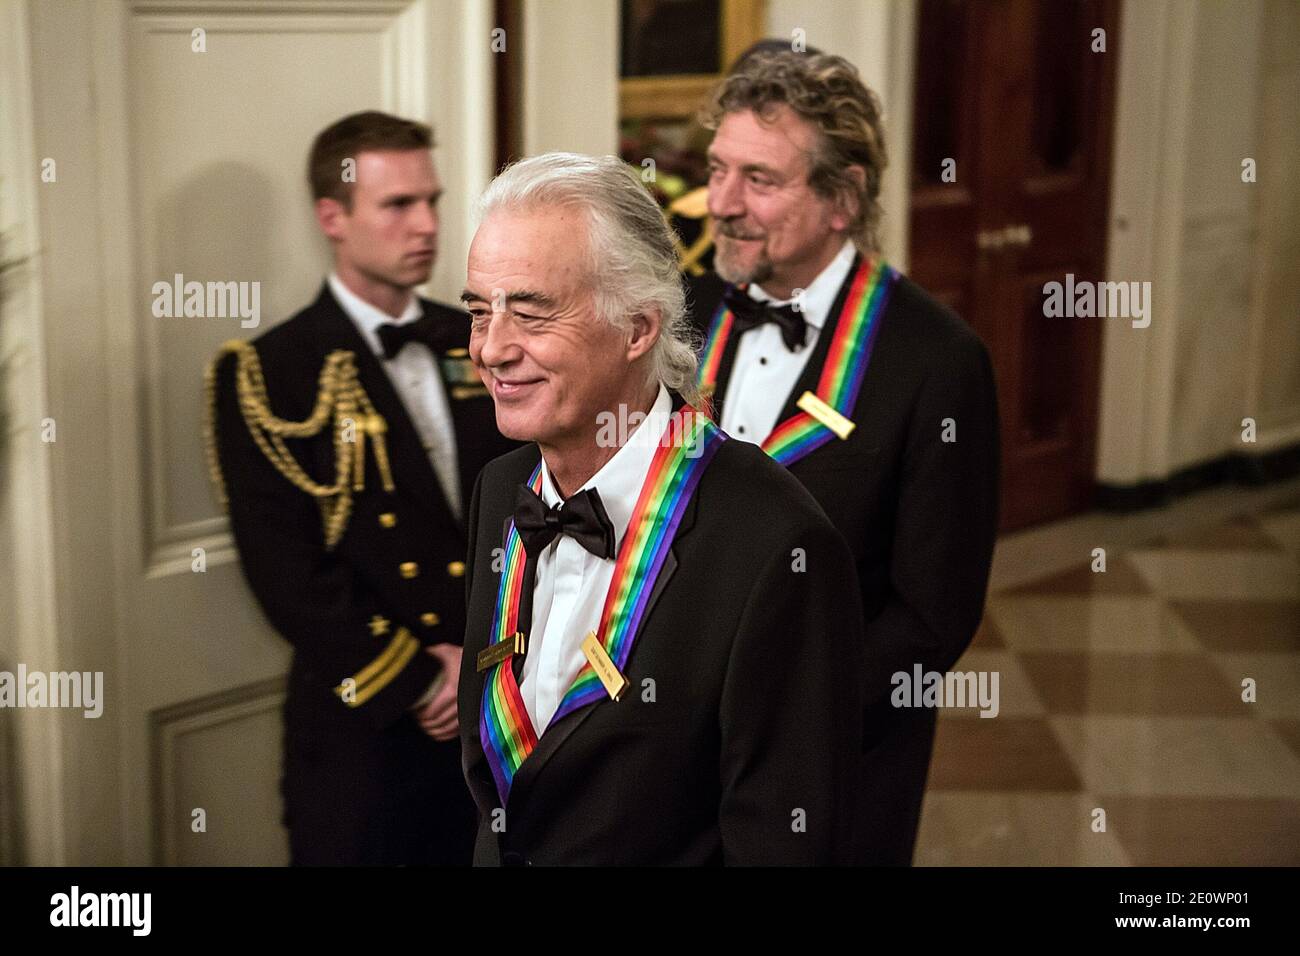 Jimmy Page (L) and Robert Plant of the band Led Zeppelin attend the Kennedy Center Honors reception at the White House in Washington, USA, on December 2, 2012. The Kennedy Center